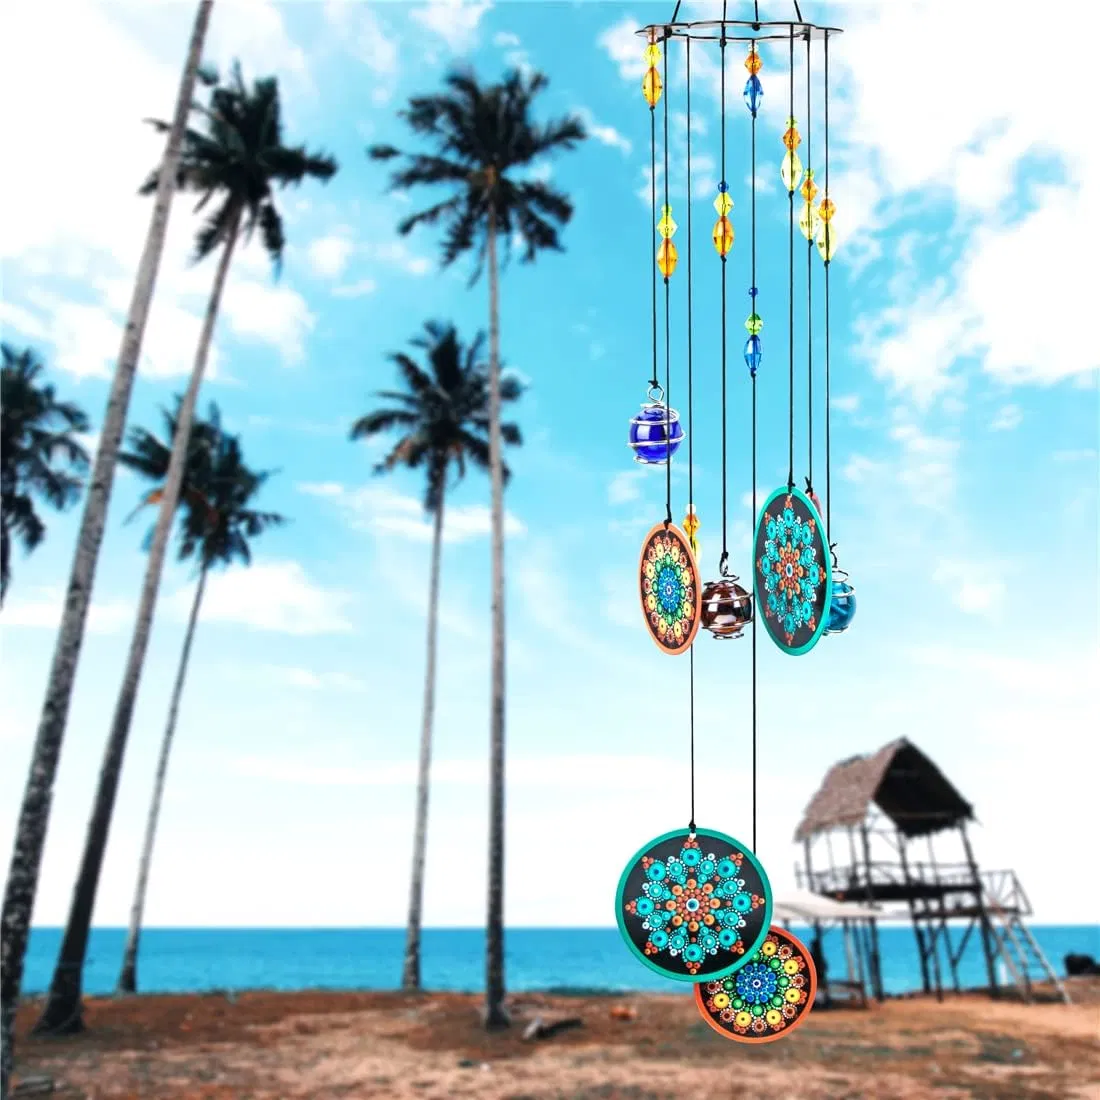 Home Gift Flower Wind Chimes Outdoors with Colorful Glass Beads Deep Tone Memorial Sympathy Window Garden Hanging Windchimes for Outside